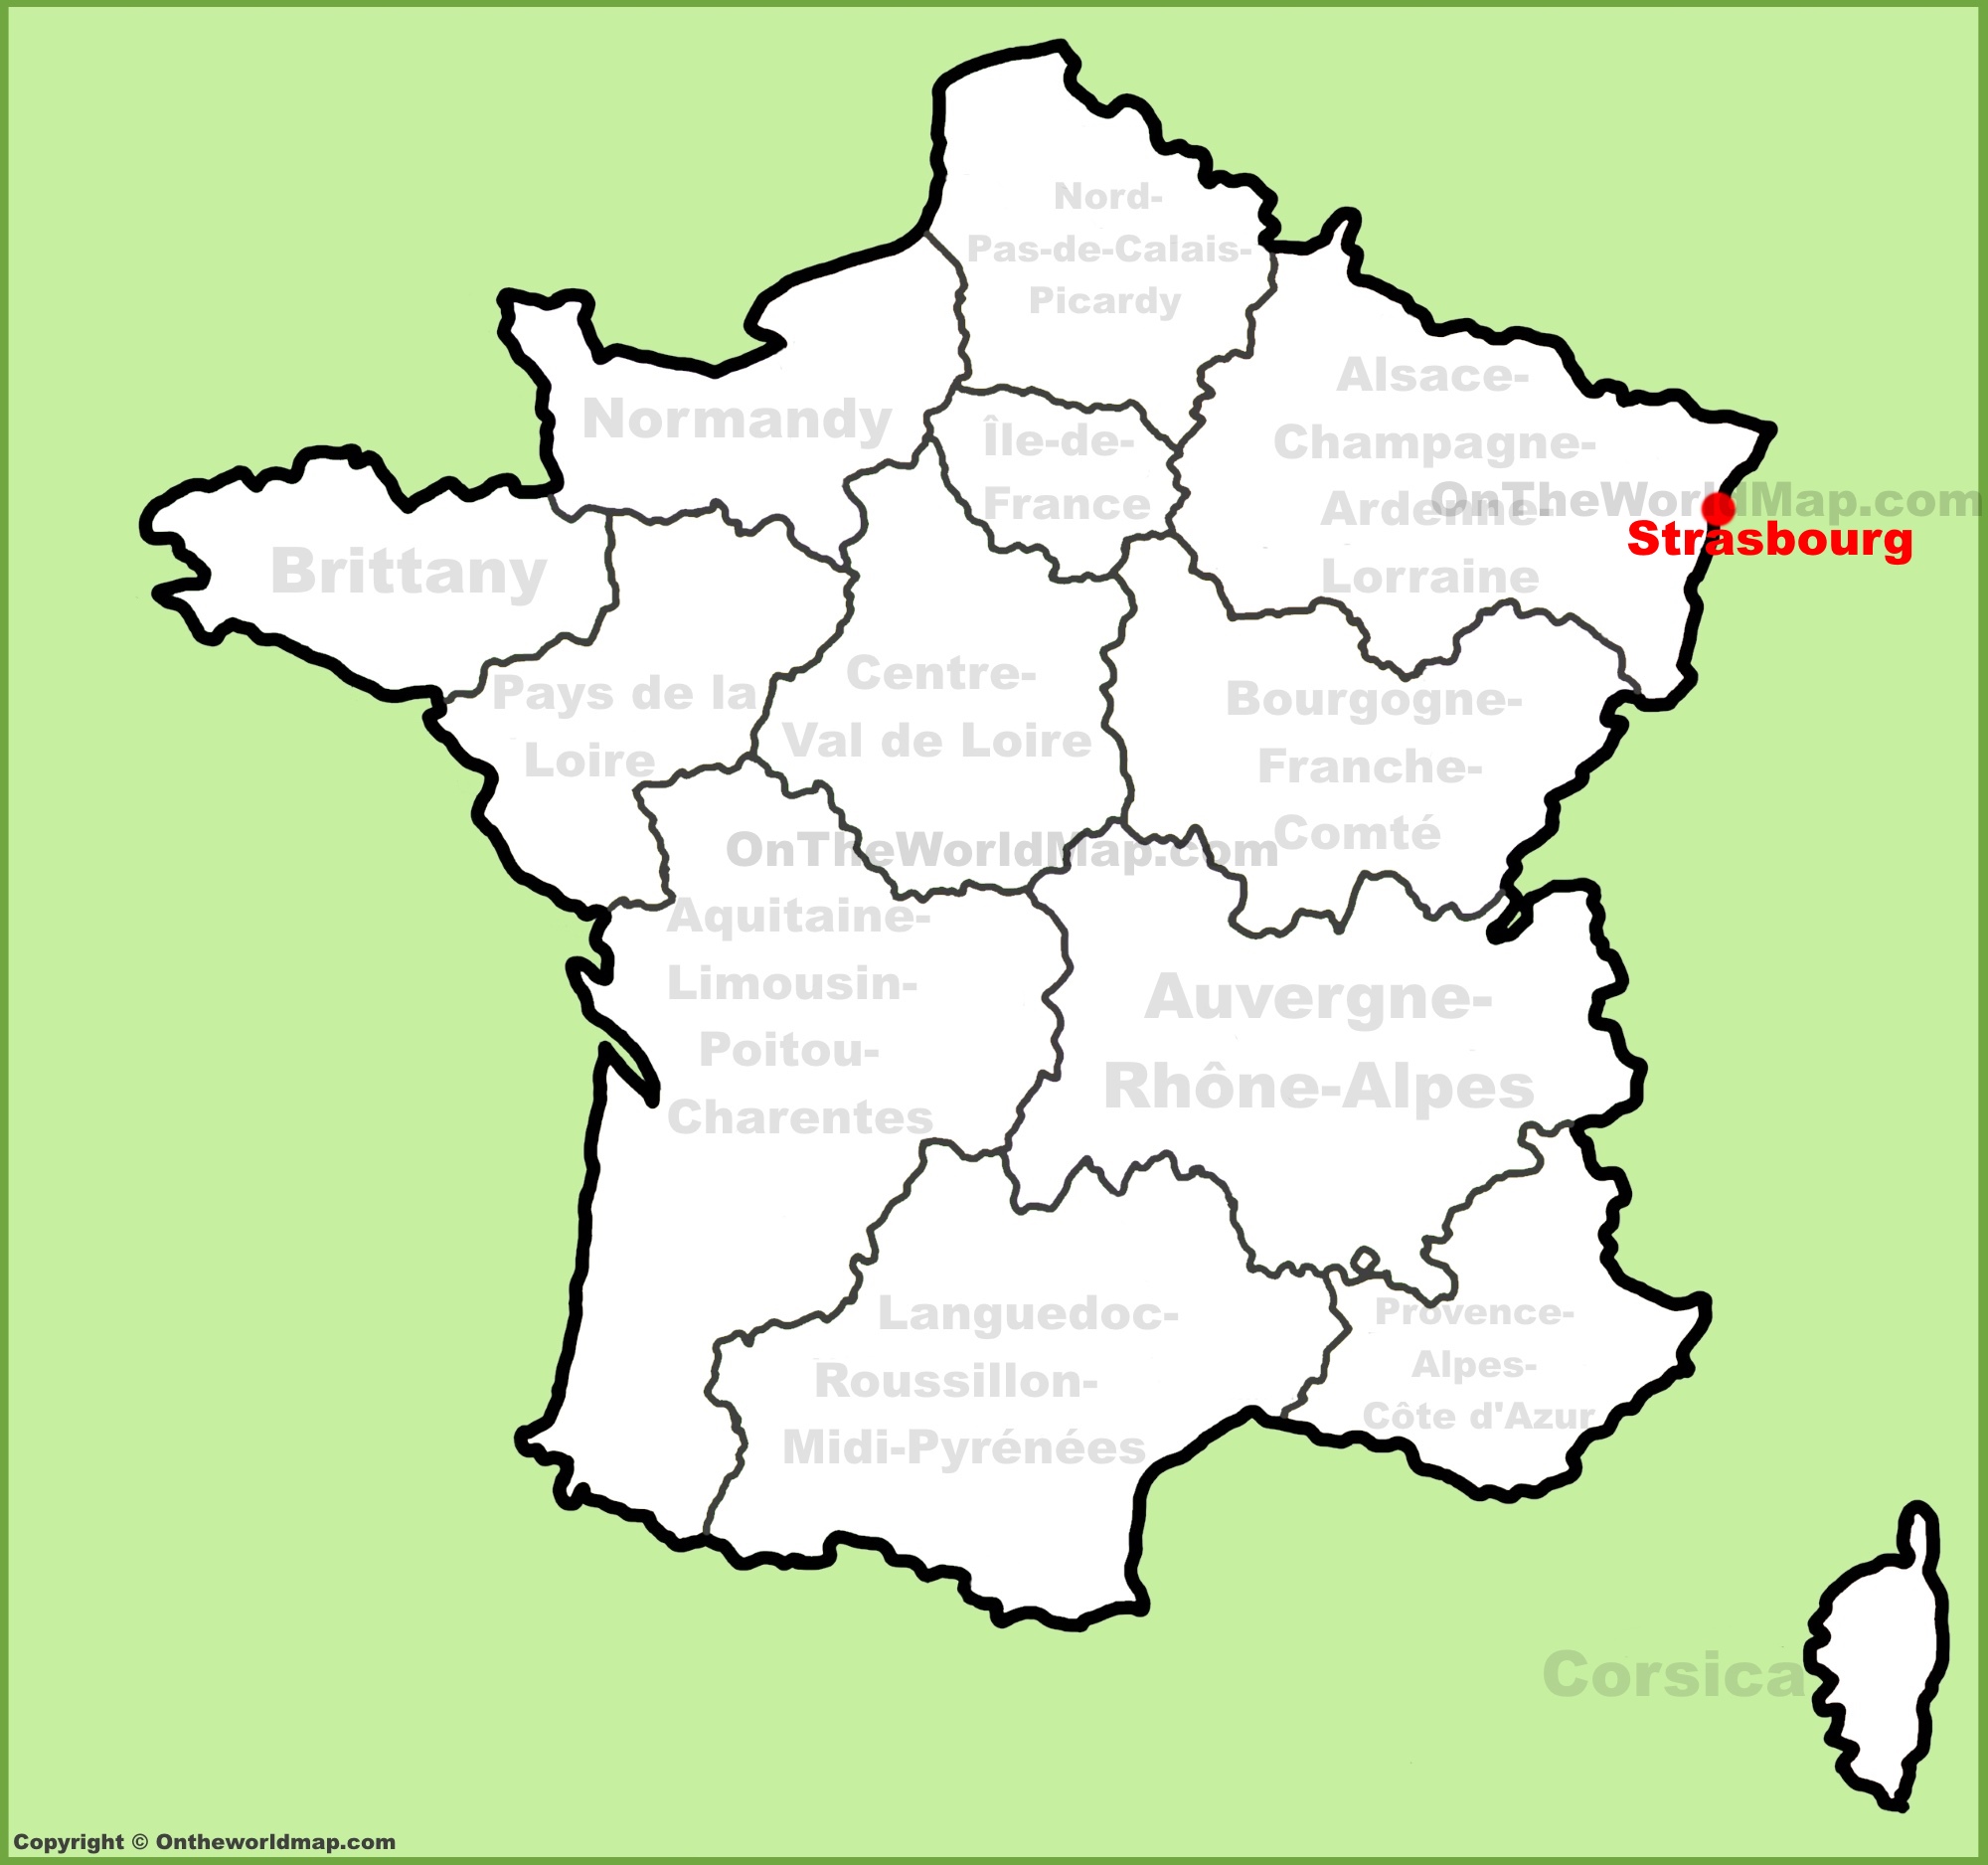 All 103+ Images where is strasbourg on a map of france Full HD, 2k, 4k